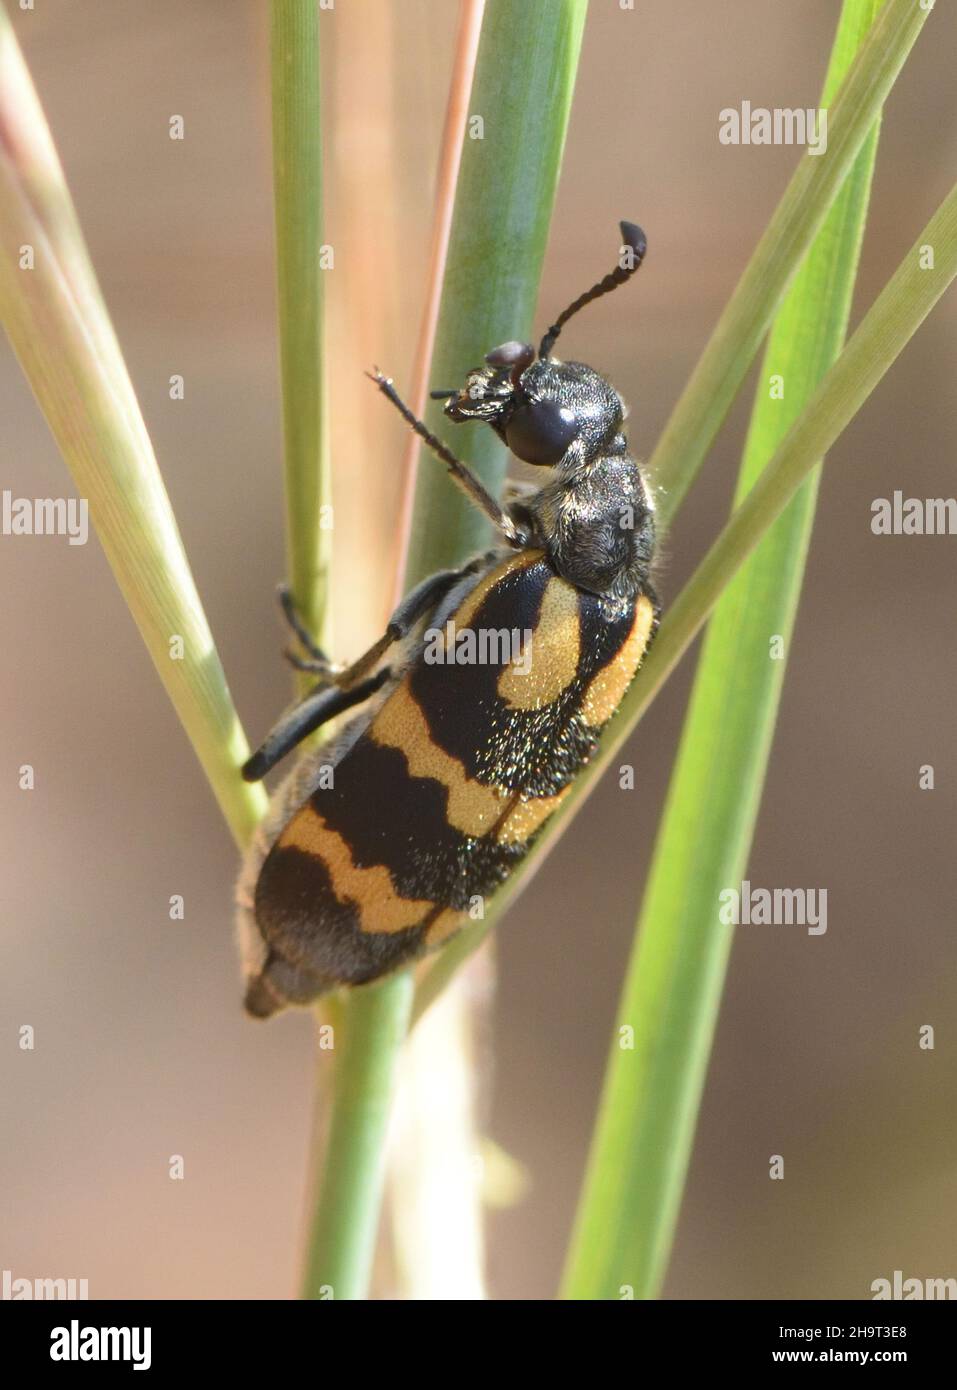 A blister beetle (Hycleus species) with dramatic warning colouration to advise prospective predators of its poisonous secretions on a grass stem. Fara Stock Photo